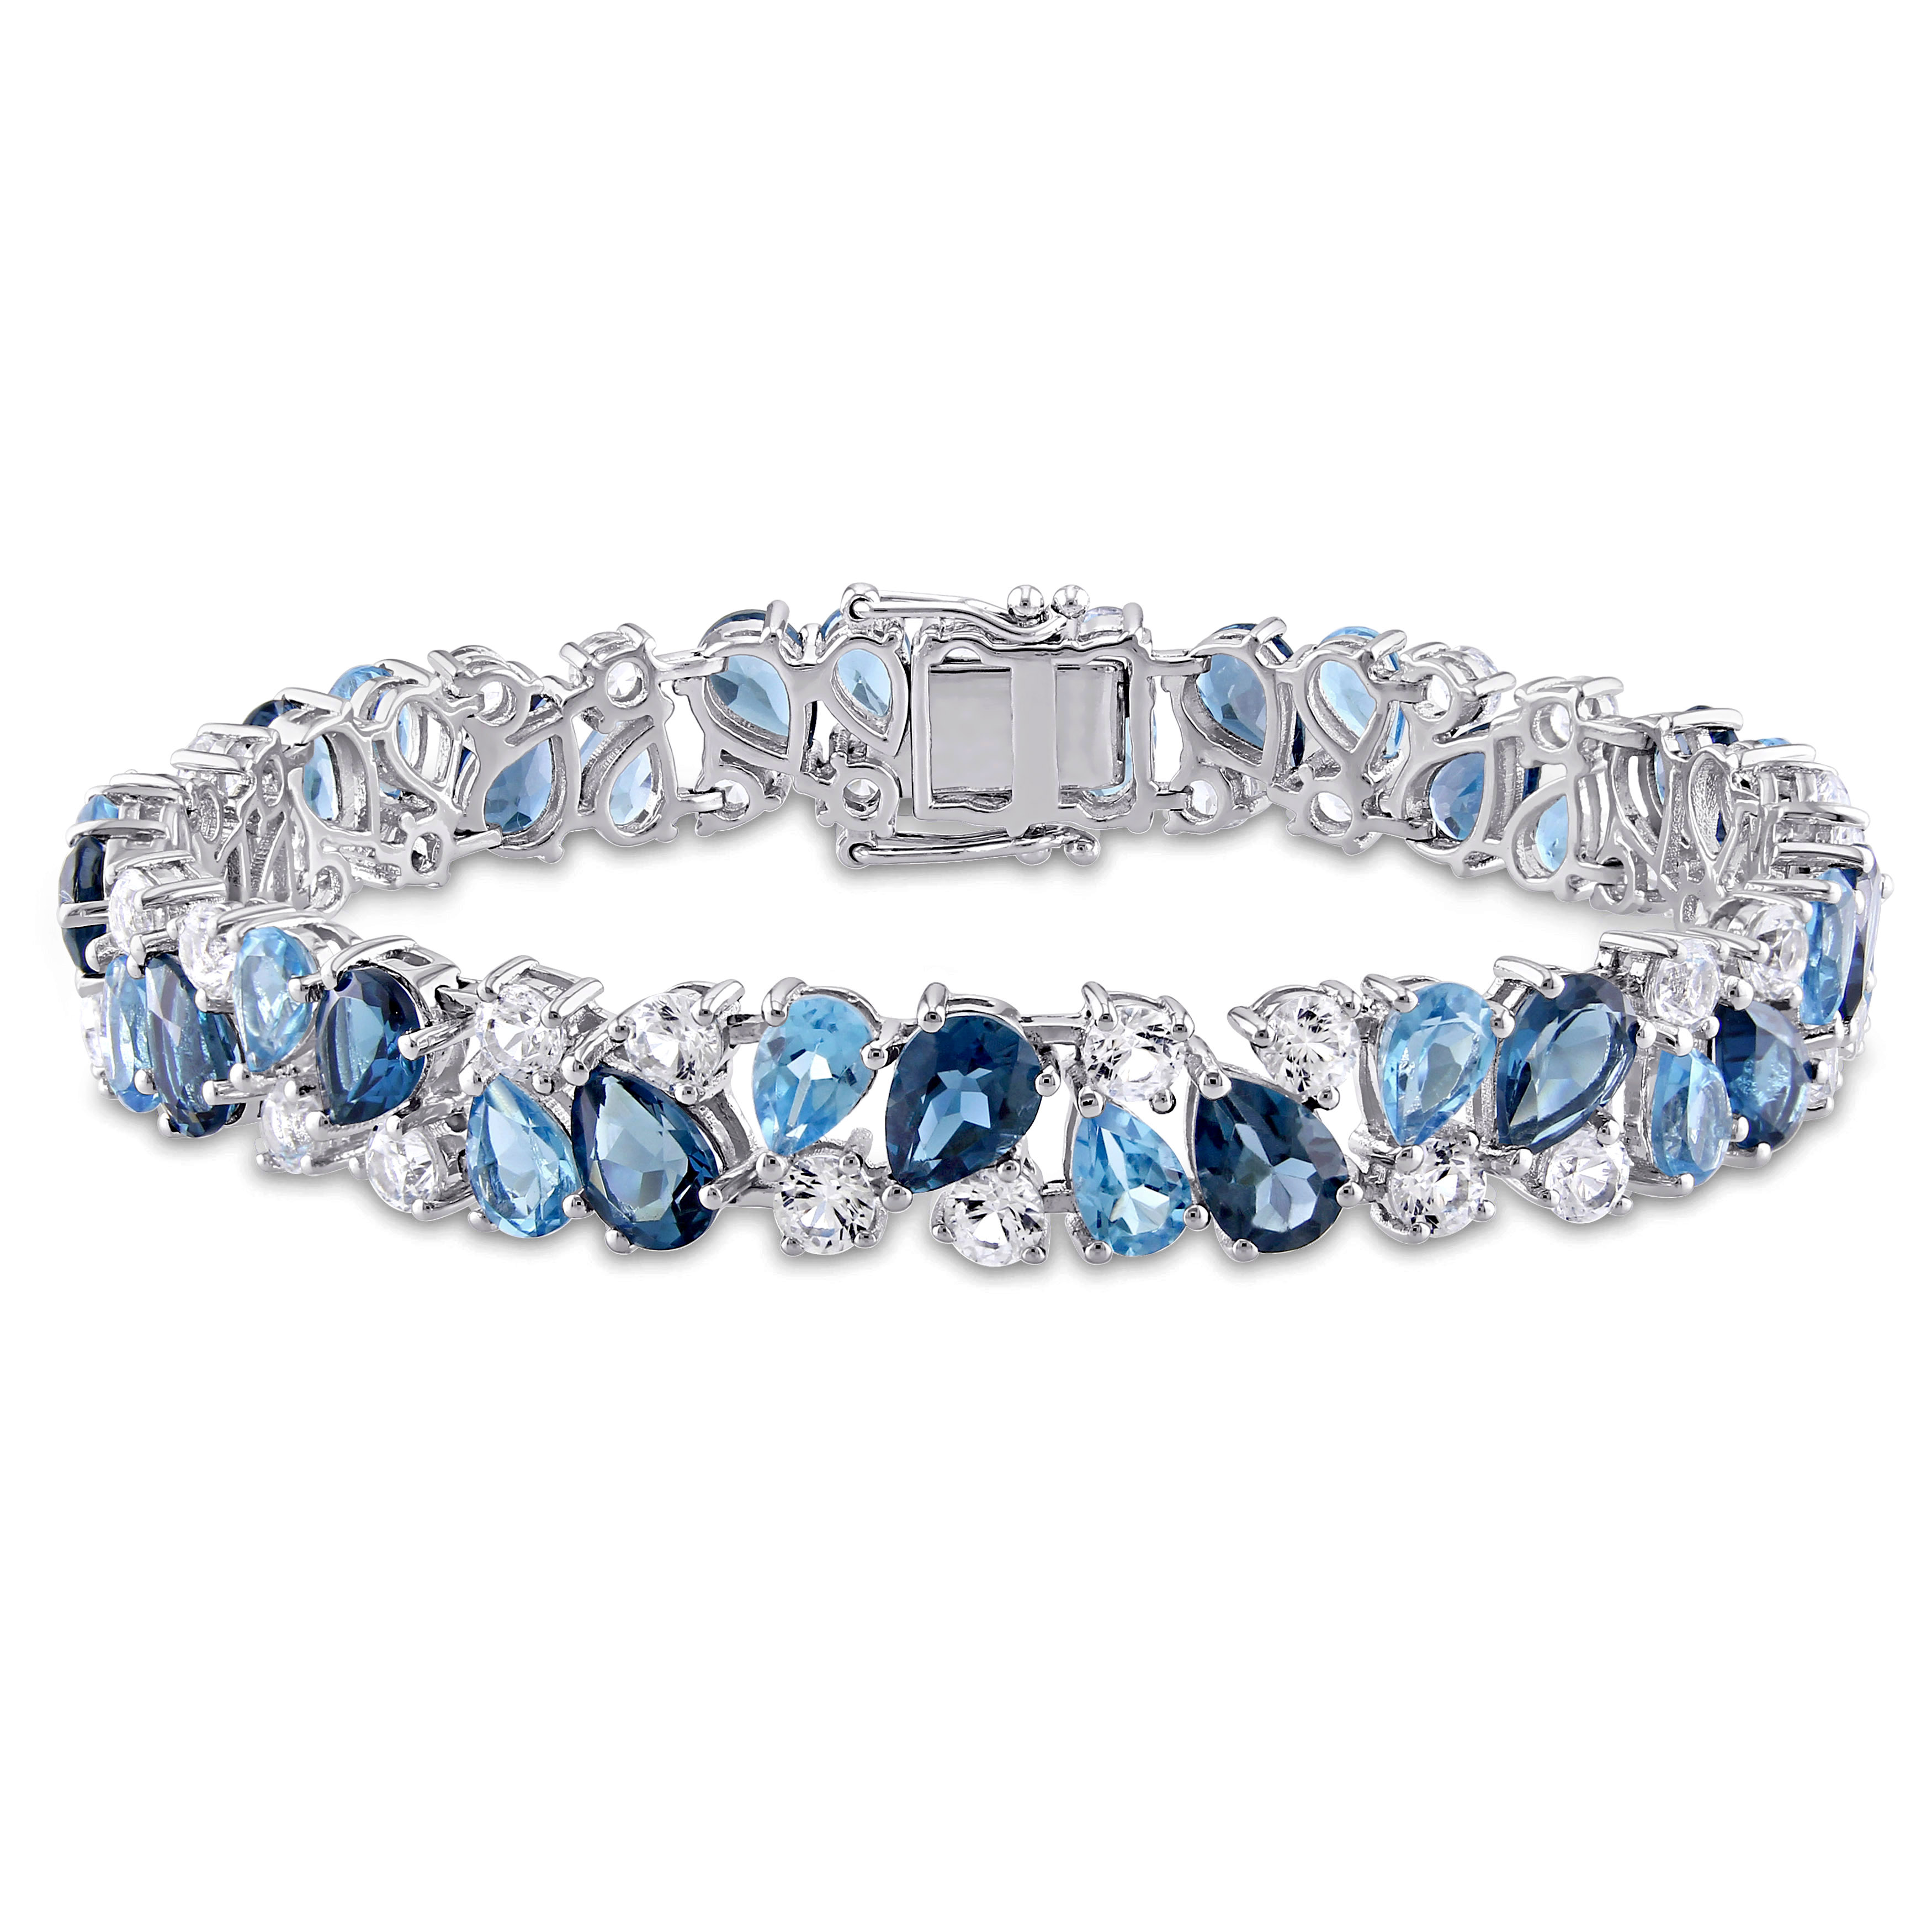 33 1/3 CT TGW London and Swiss Blue Topaz and Created White Sapphire Teardrop Bracelet in Sterling Silver